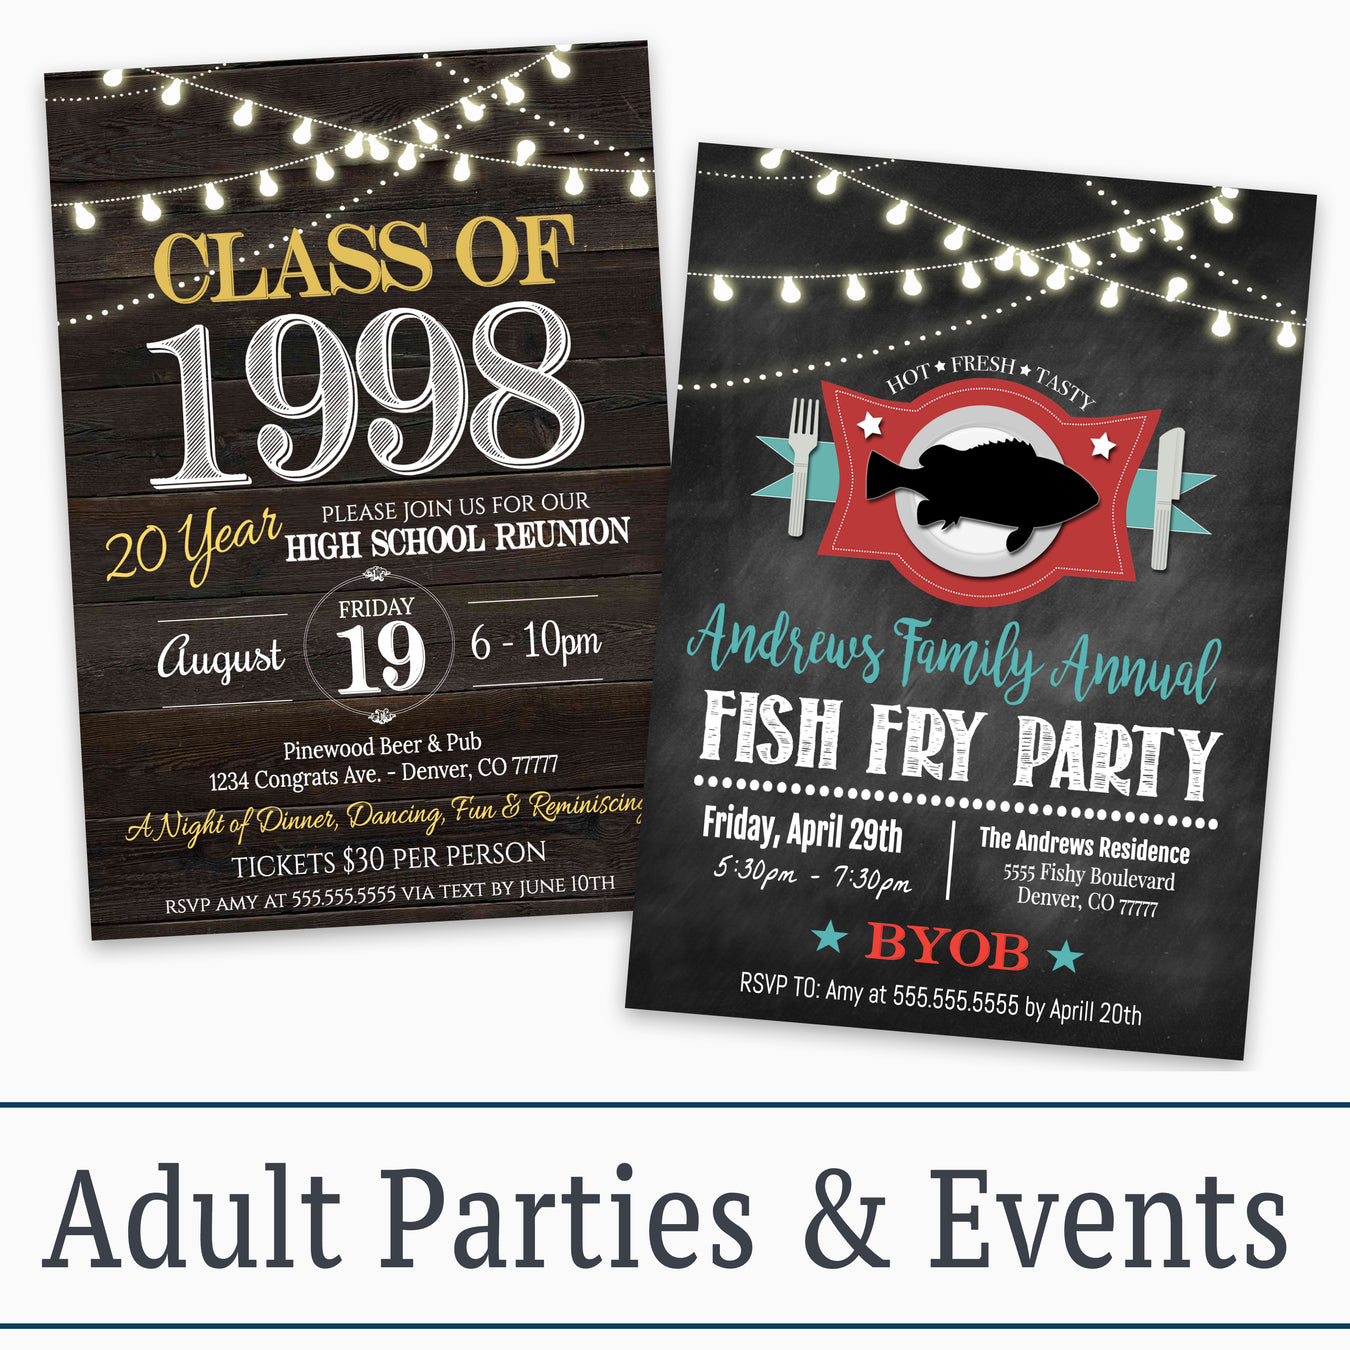 Adult Parties & Events